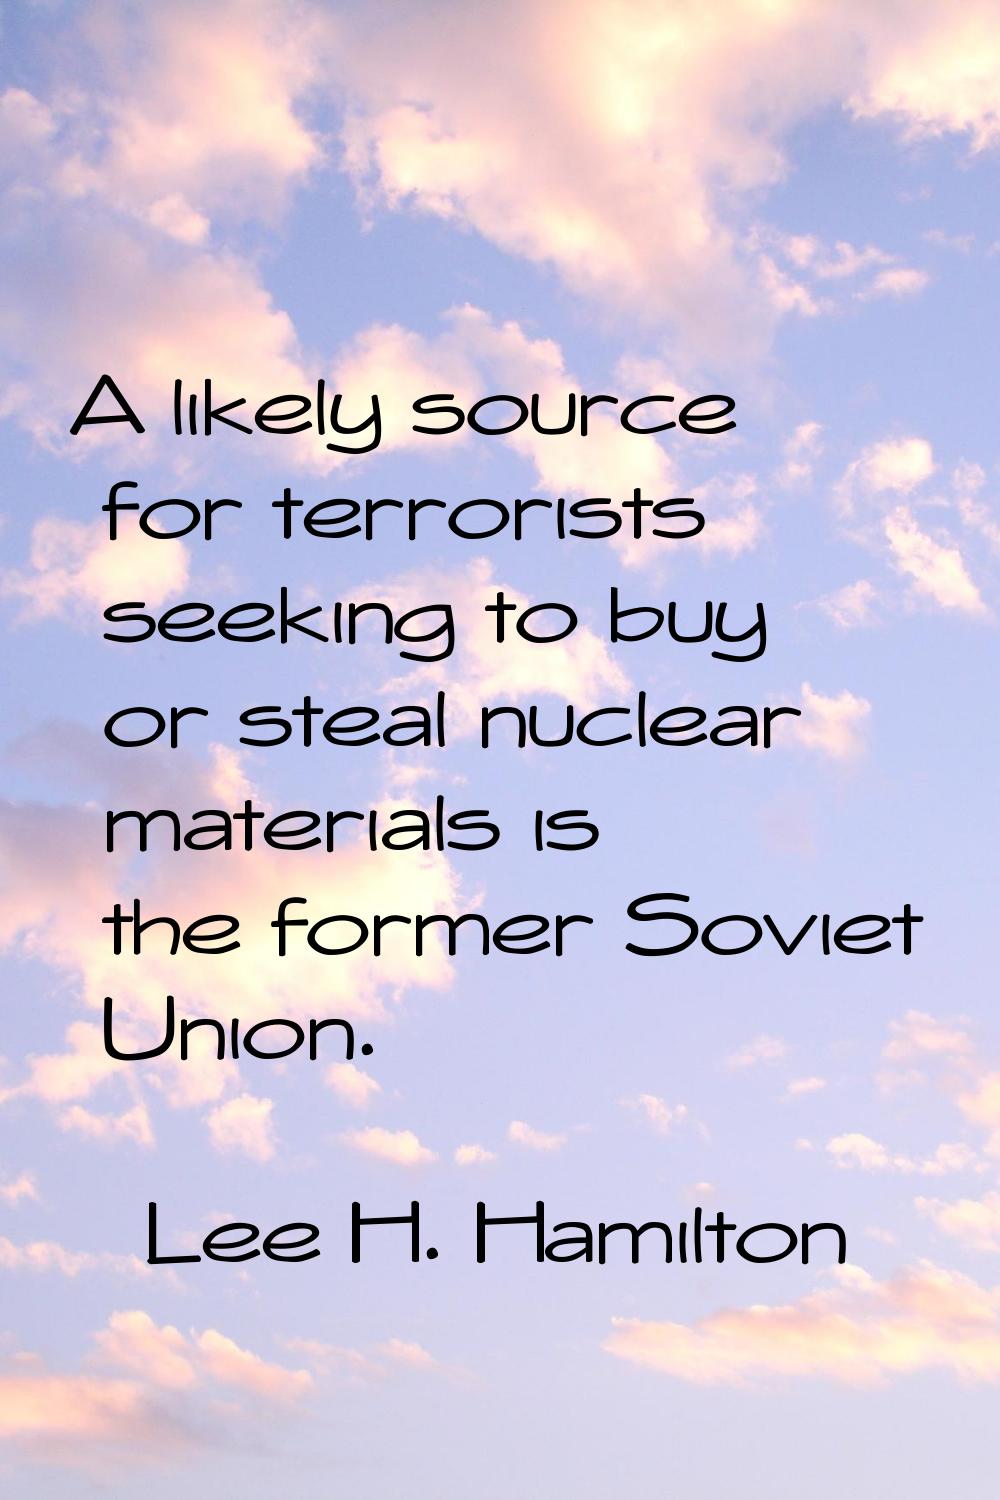 A likely source for terrorists seeking to buy or steal nuclear materials is the former Soviet Union